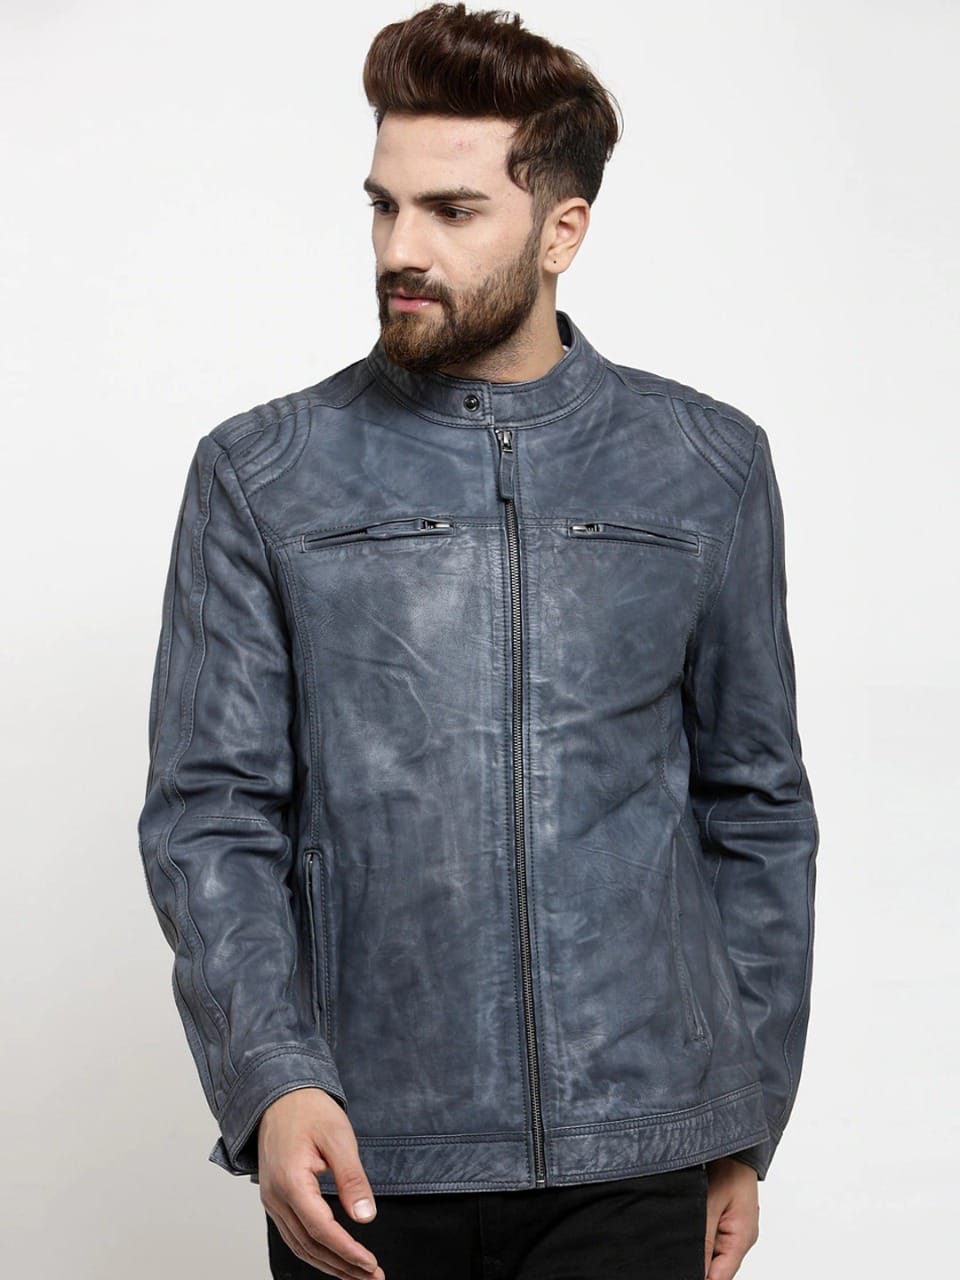 49052 - Men branded pure leather jackets India